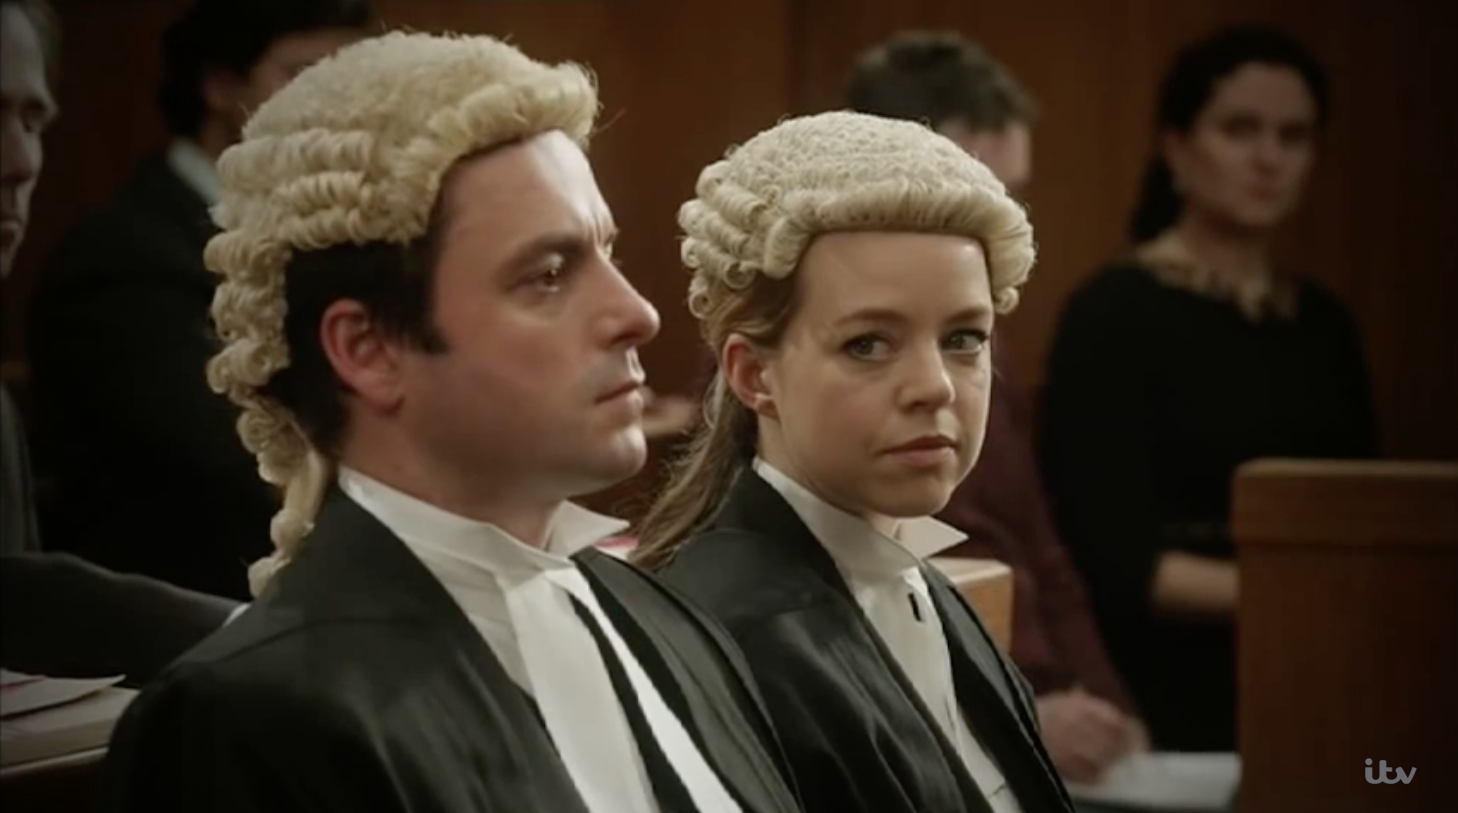 Why Do Barristers Wear Those Stupid Wigs? Above the Law